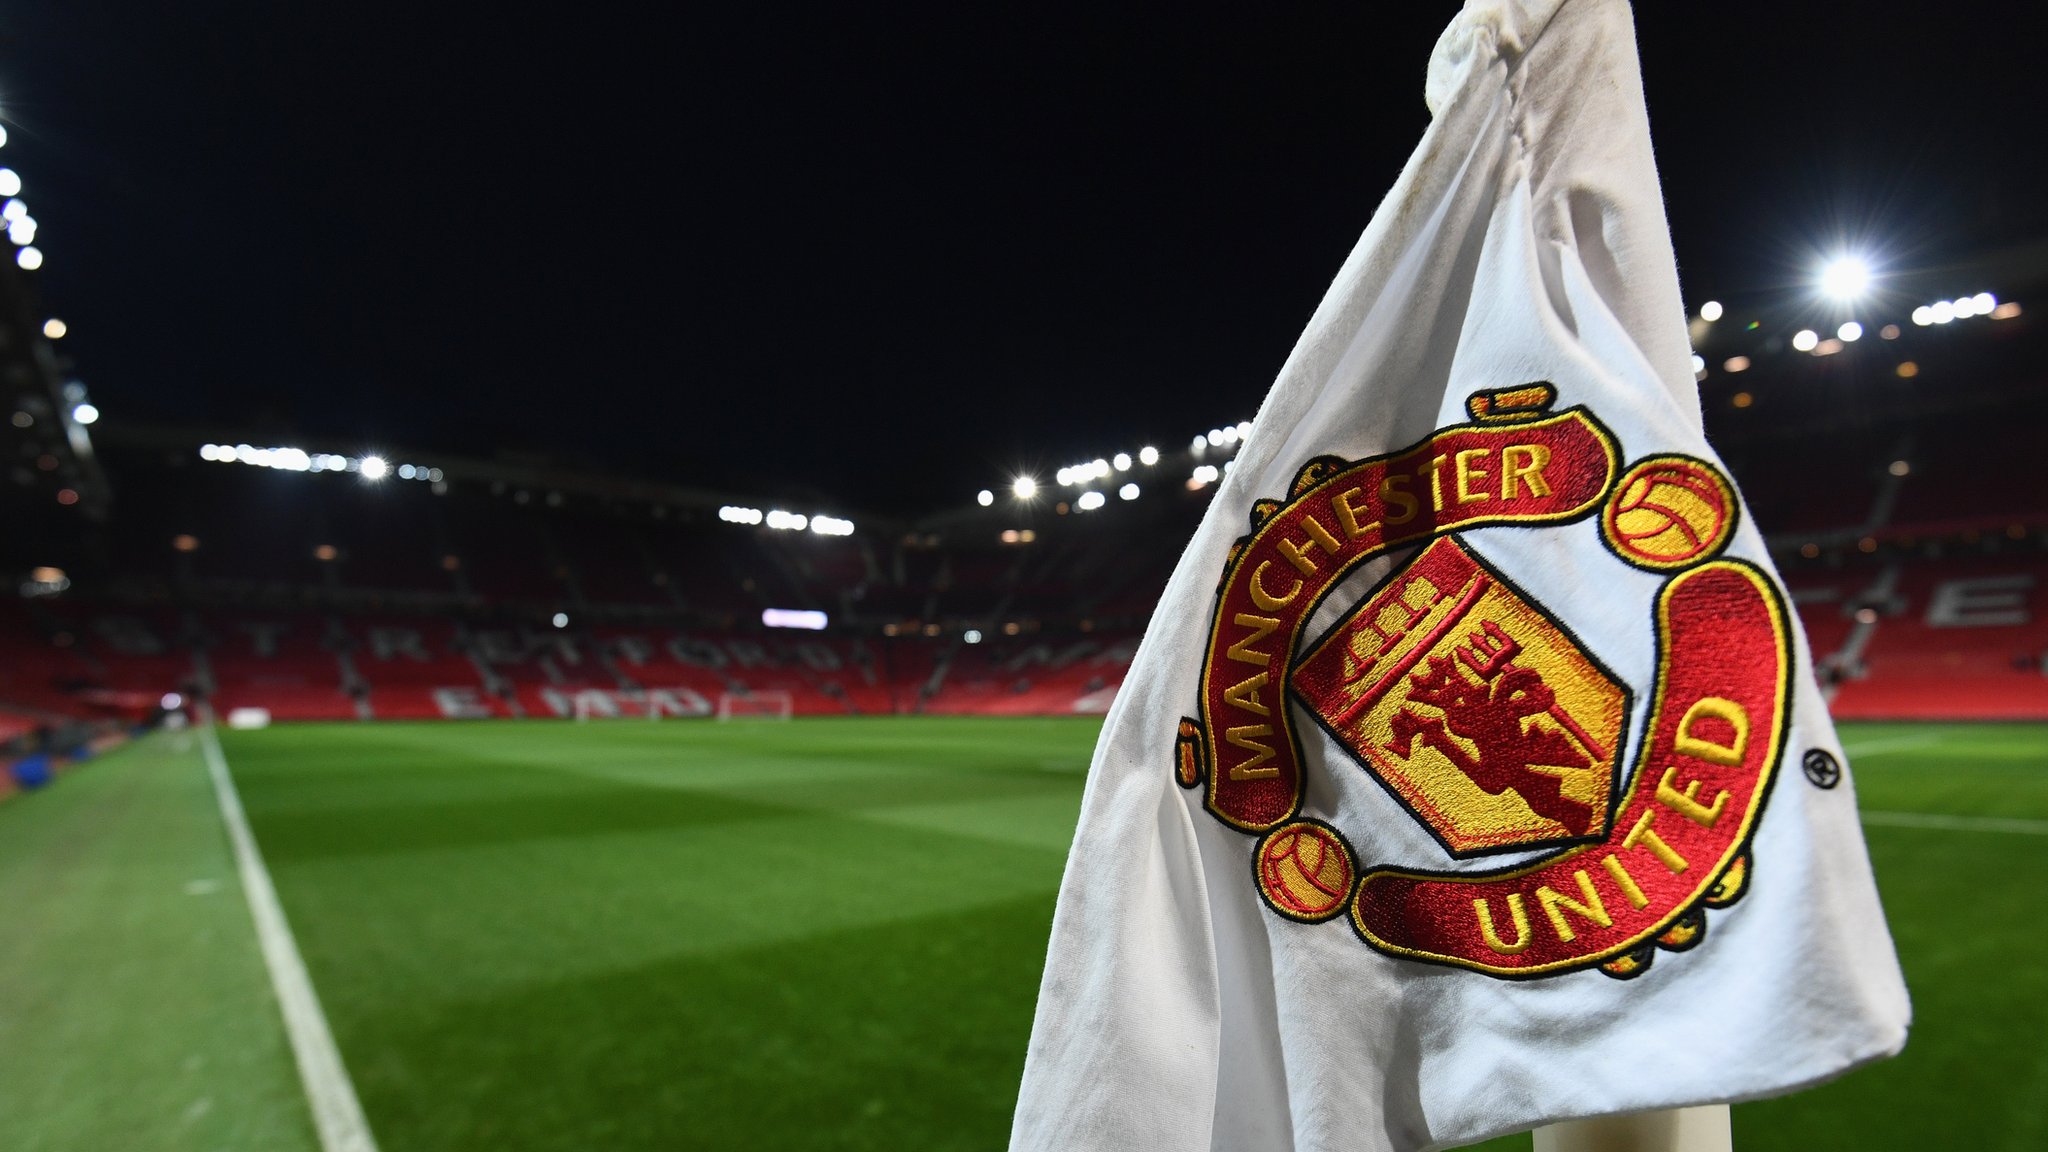 Man Utd: Collette Roche to become club's first female chief operating officer